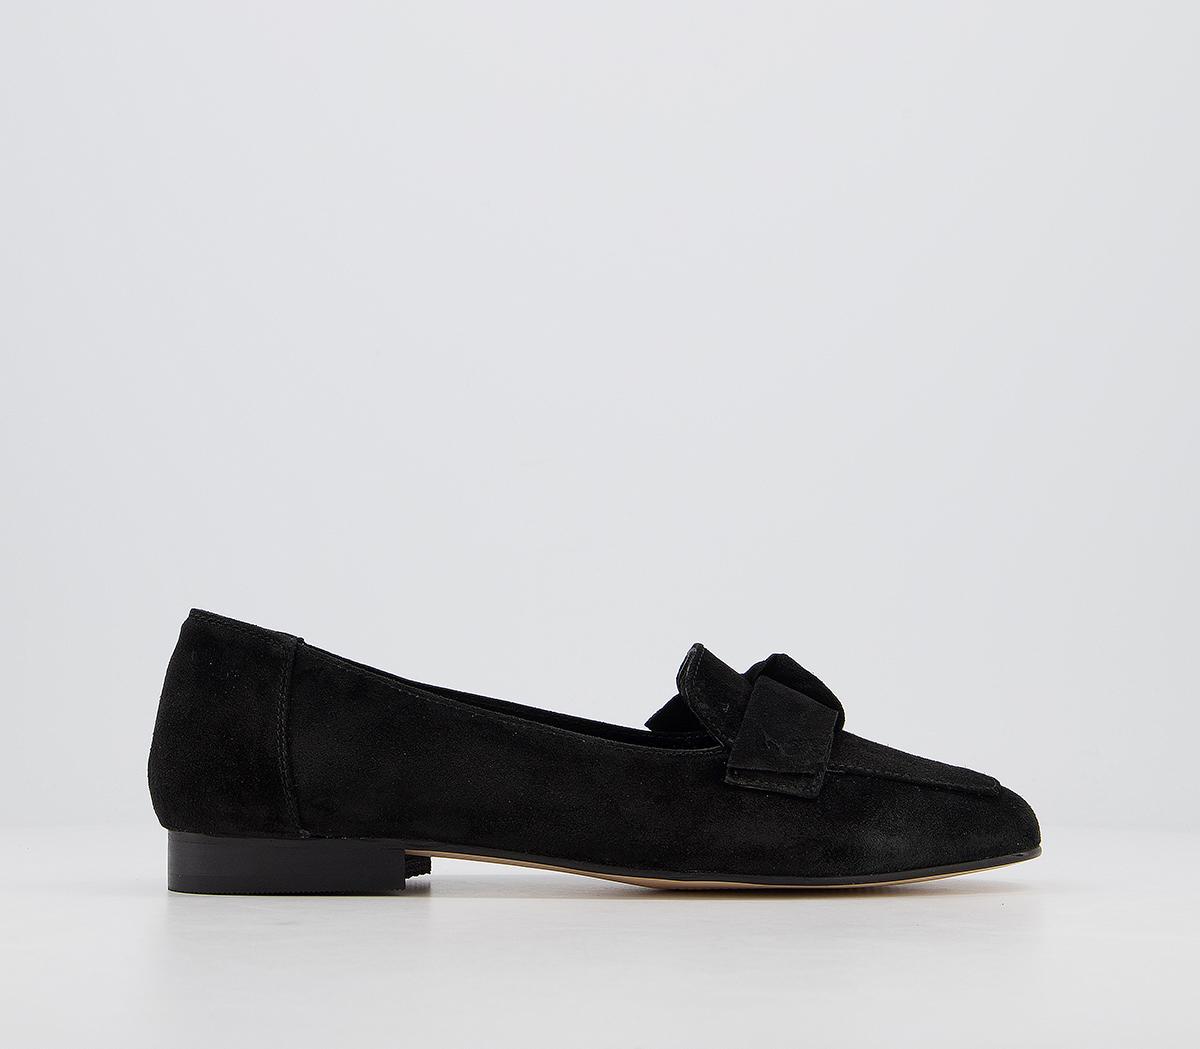 OFFICEFavoured Bow LoafersBlack Suede